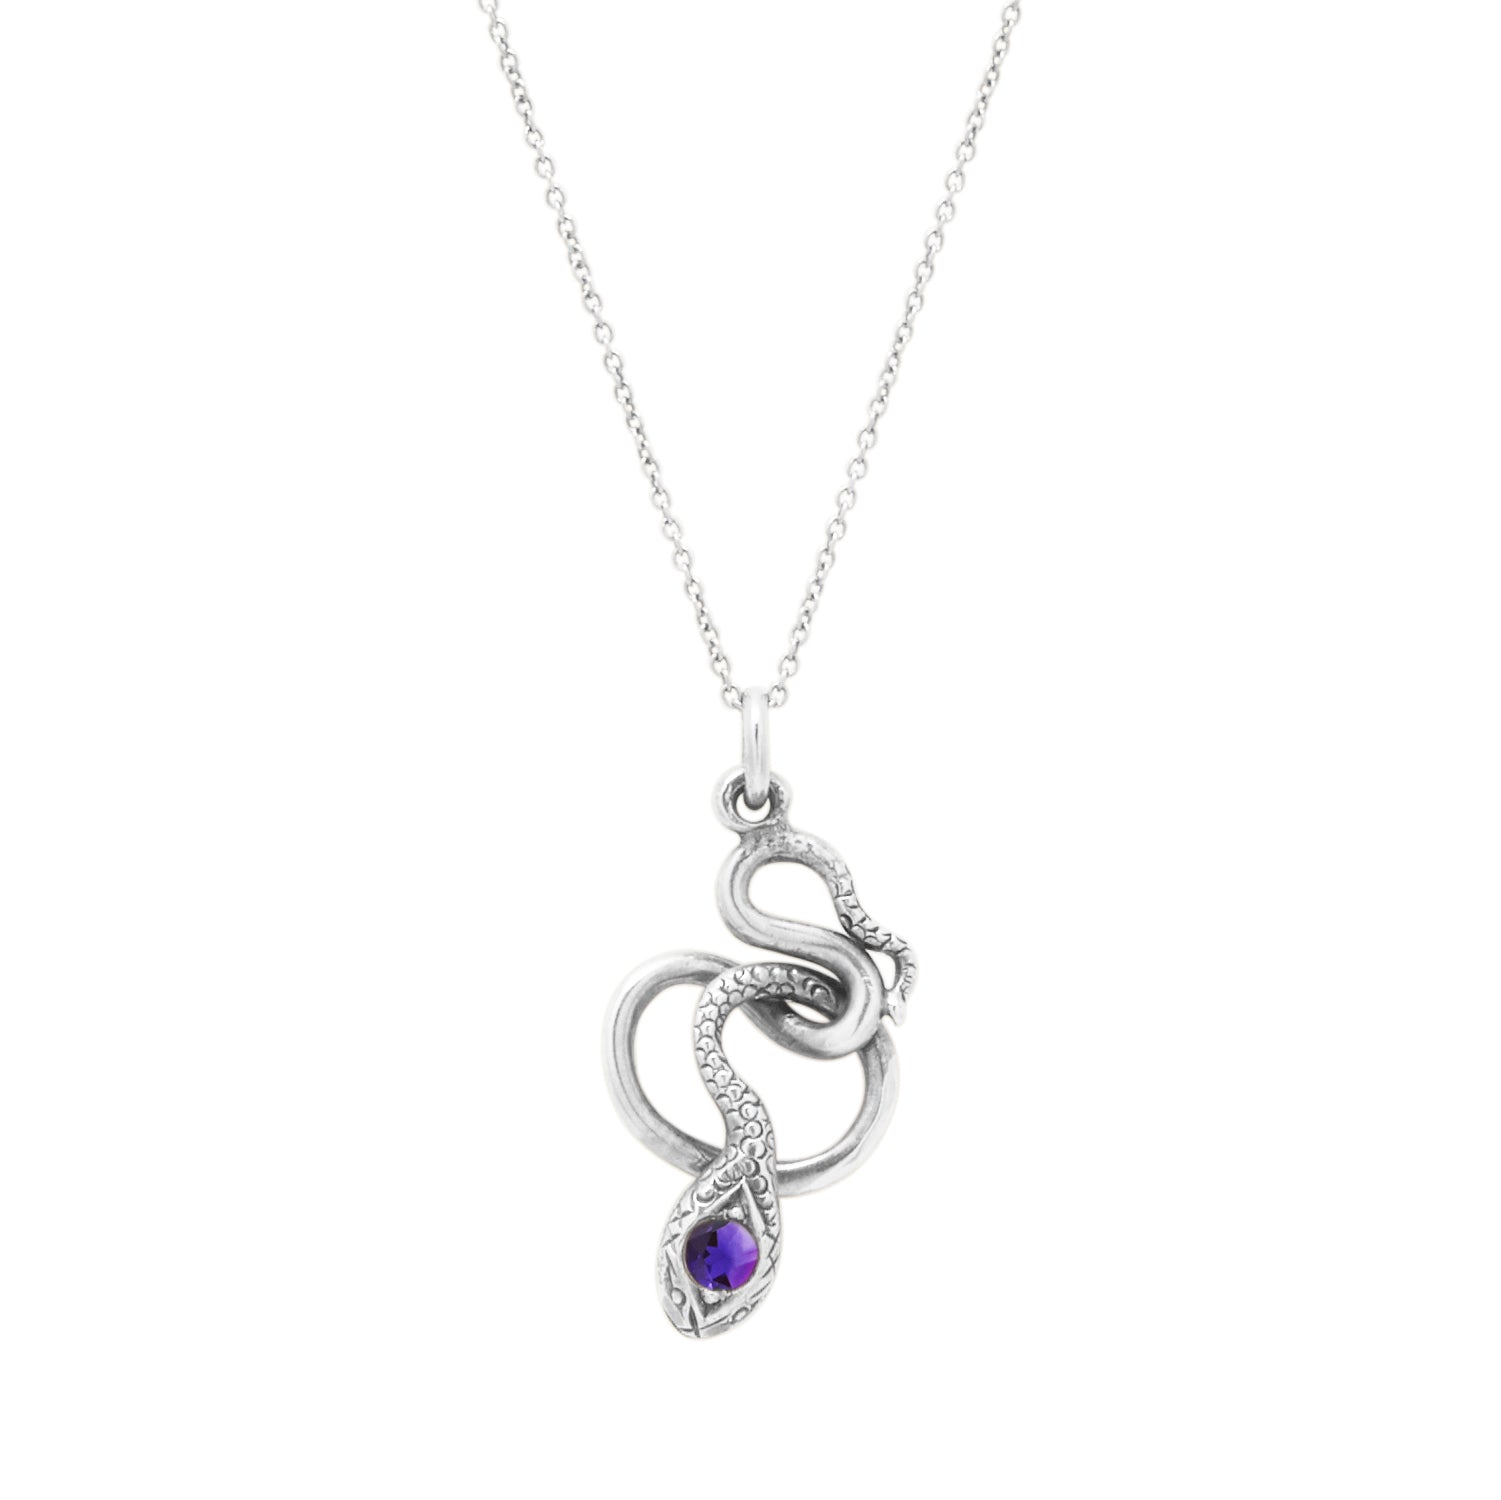 The F&B White Gold Snake Charmer Necklace